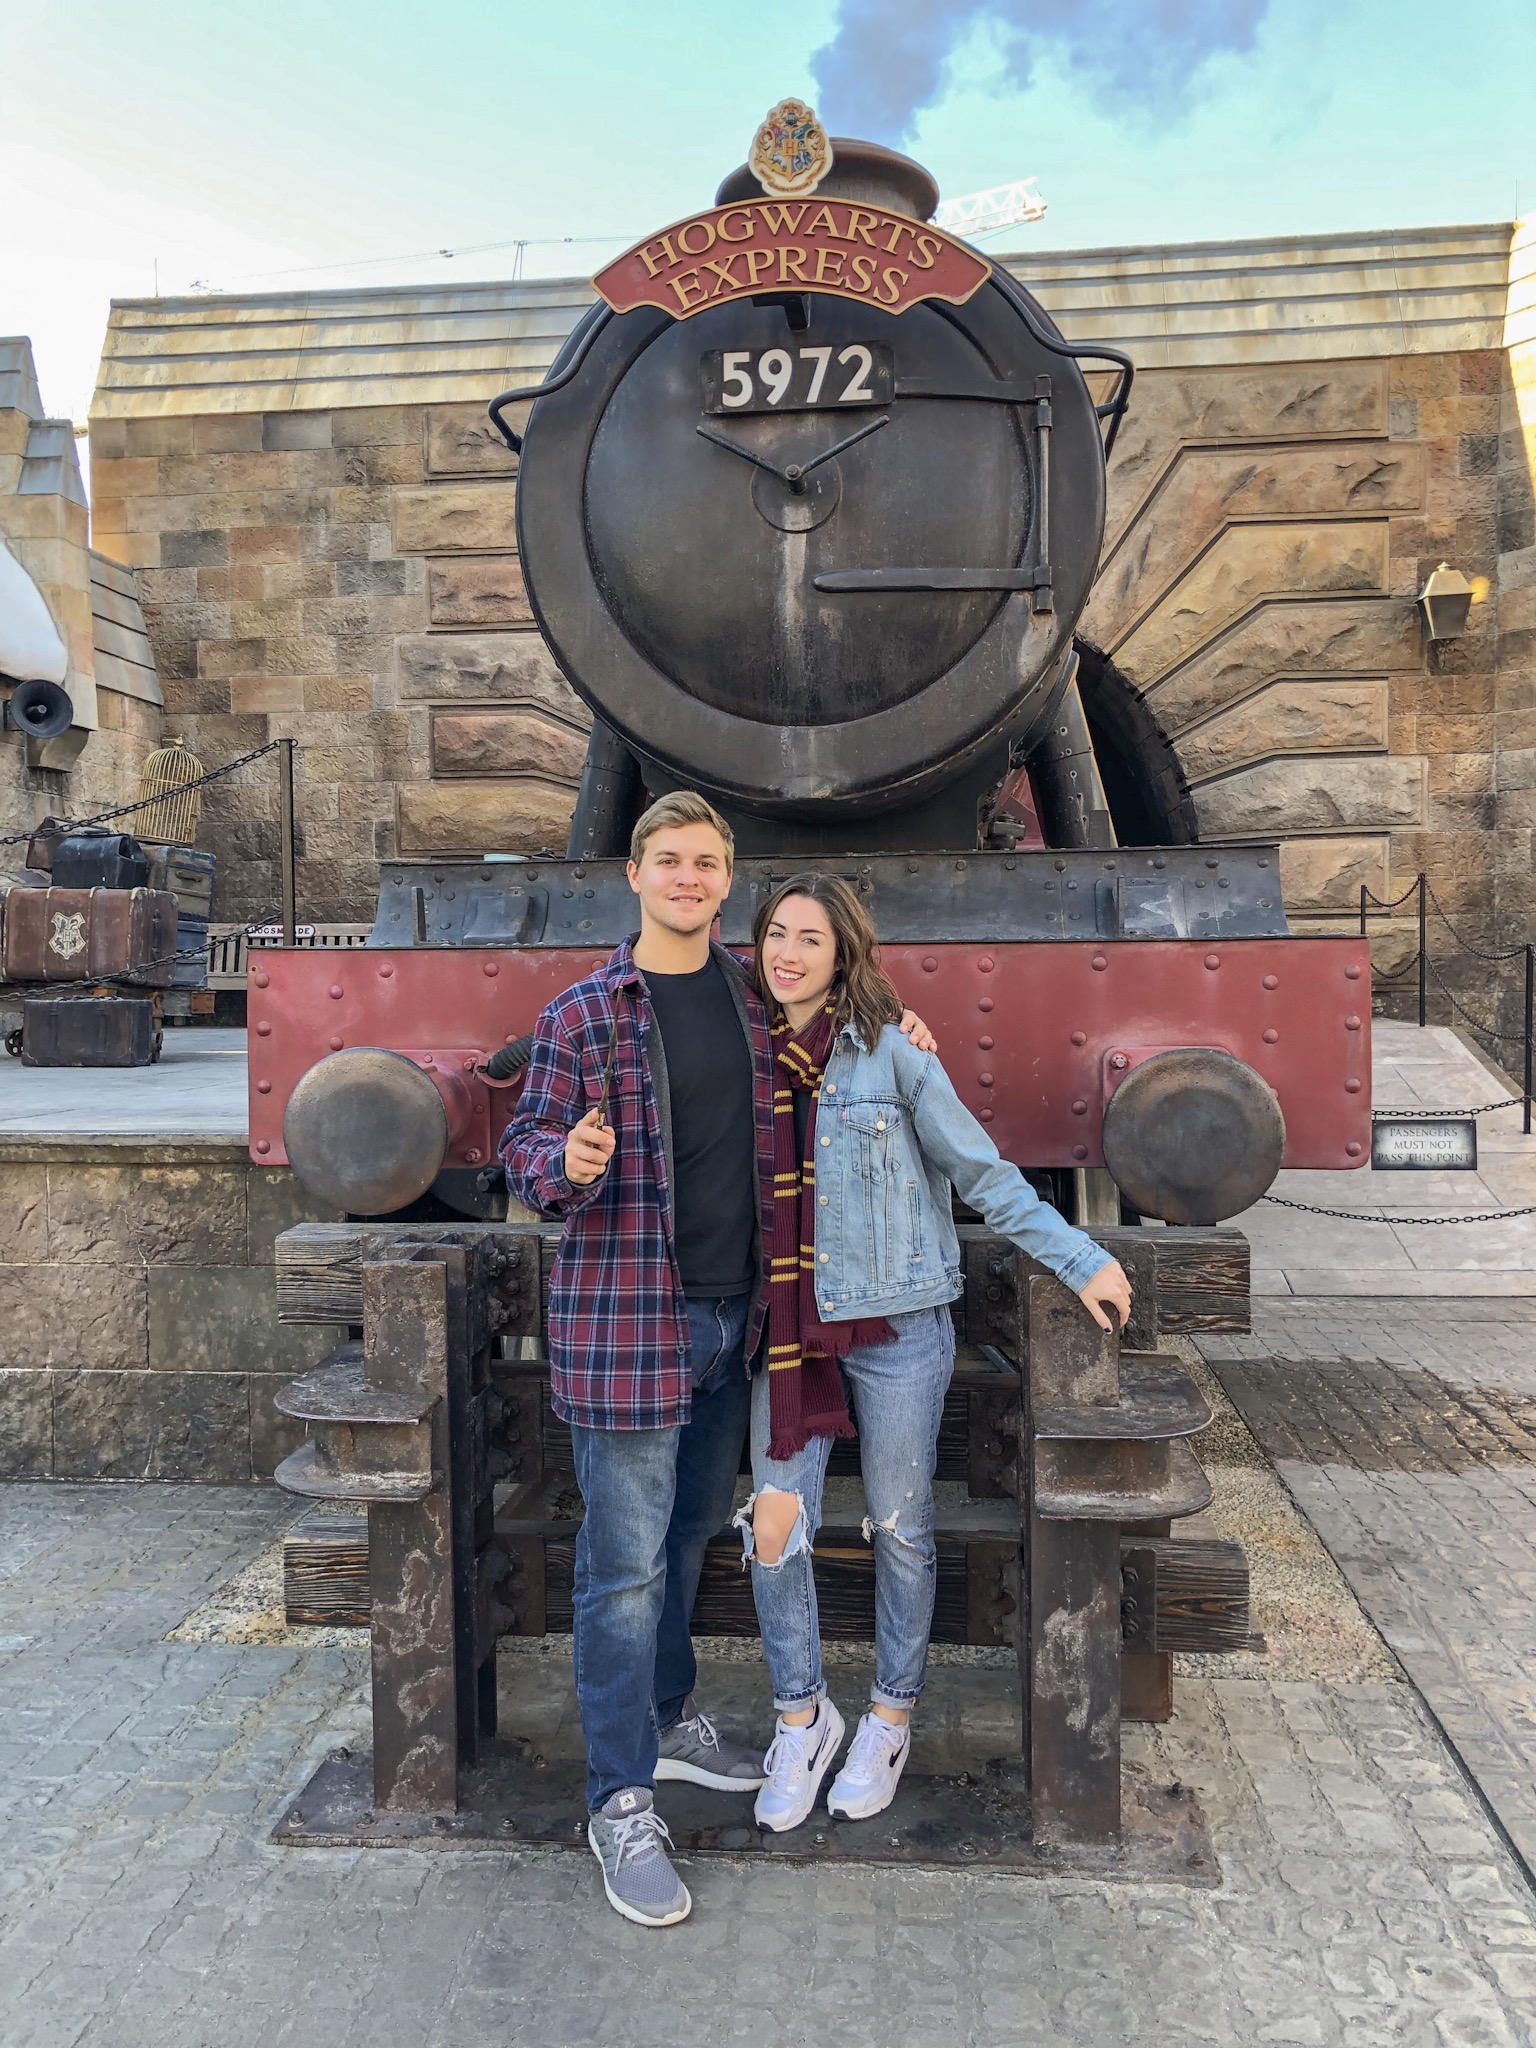 The Muggle's Ultimate Guide to Hogsmeade Village